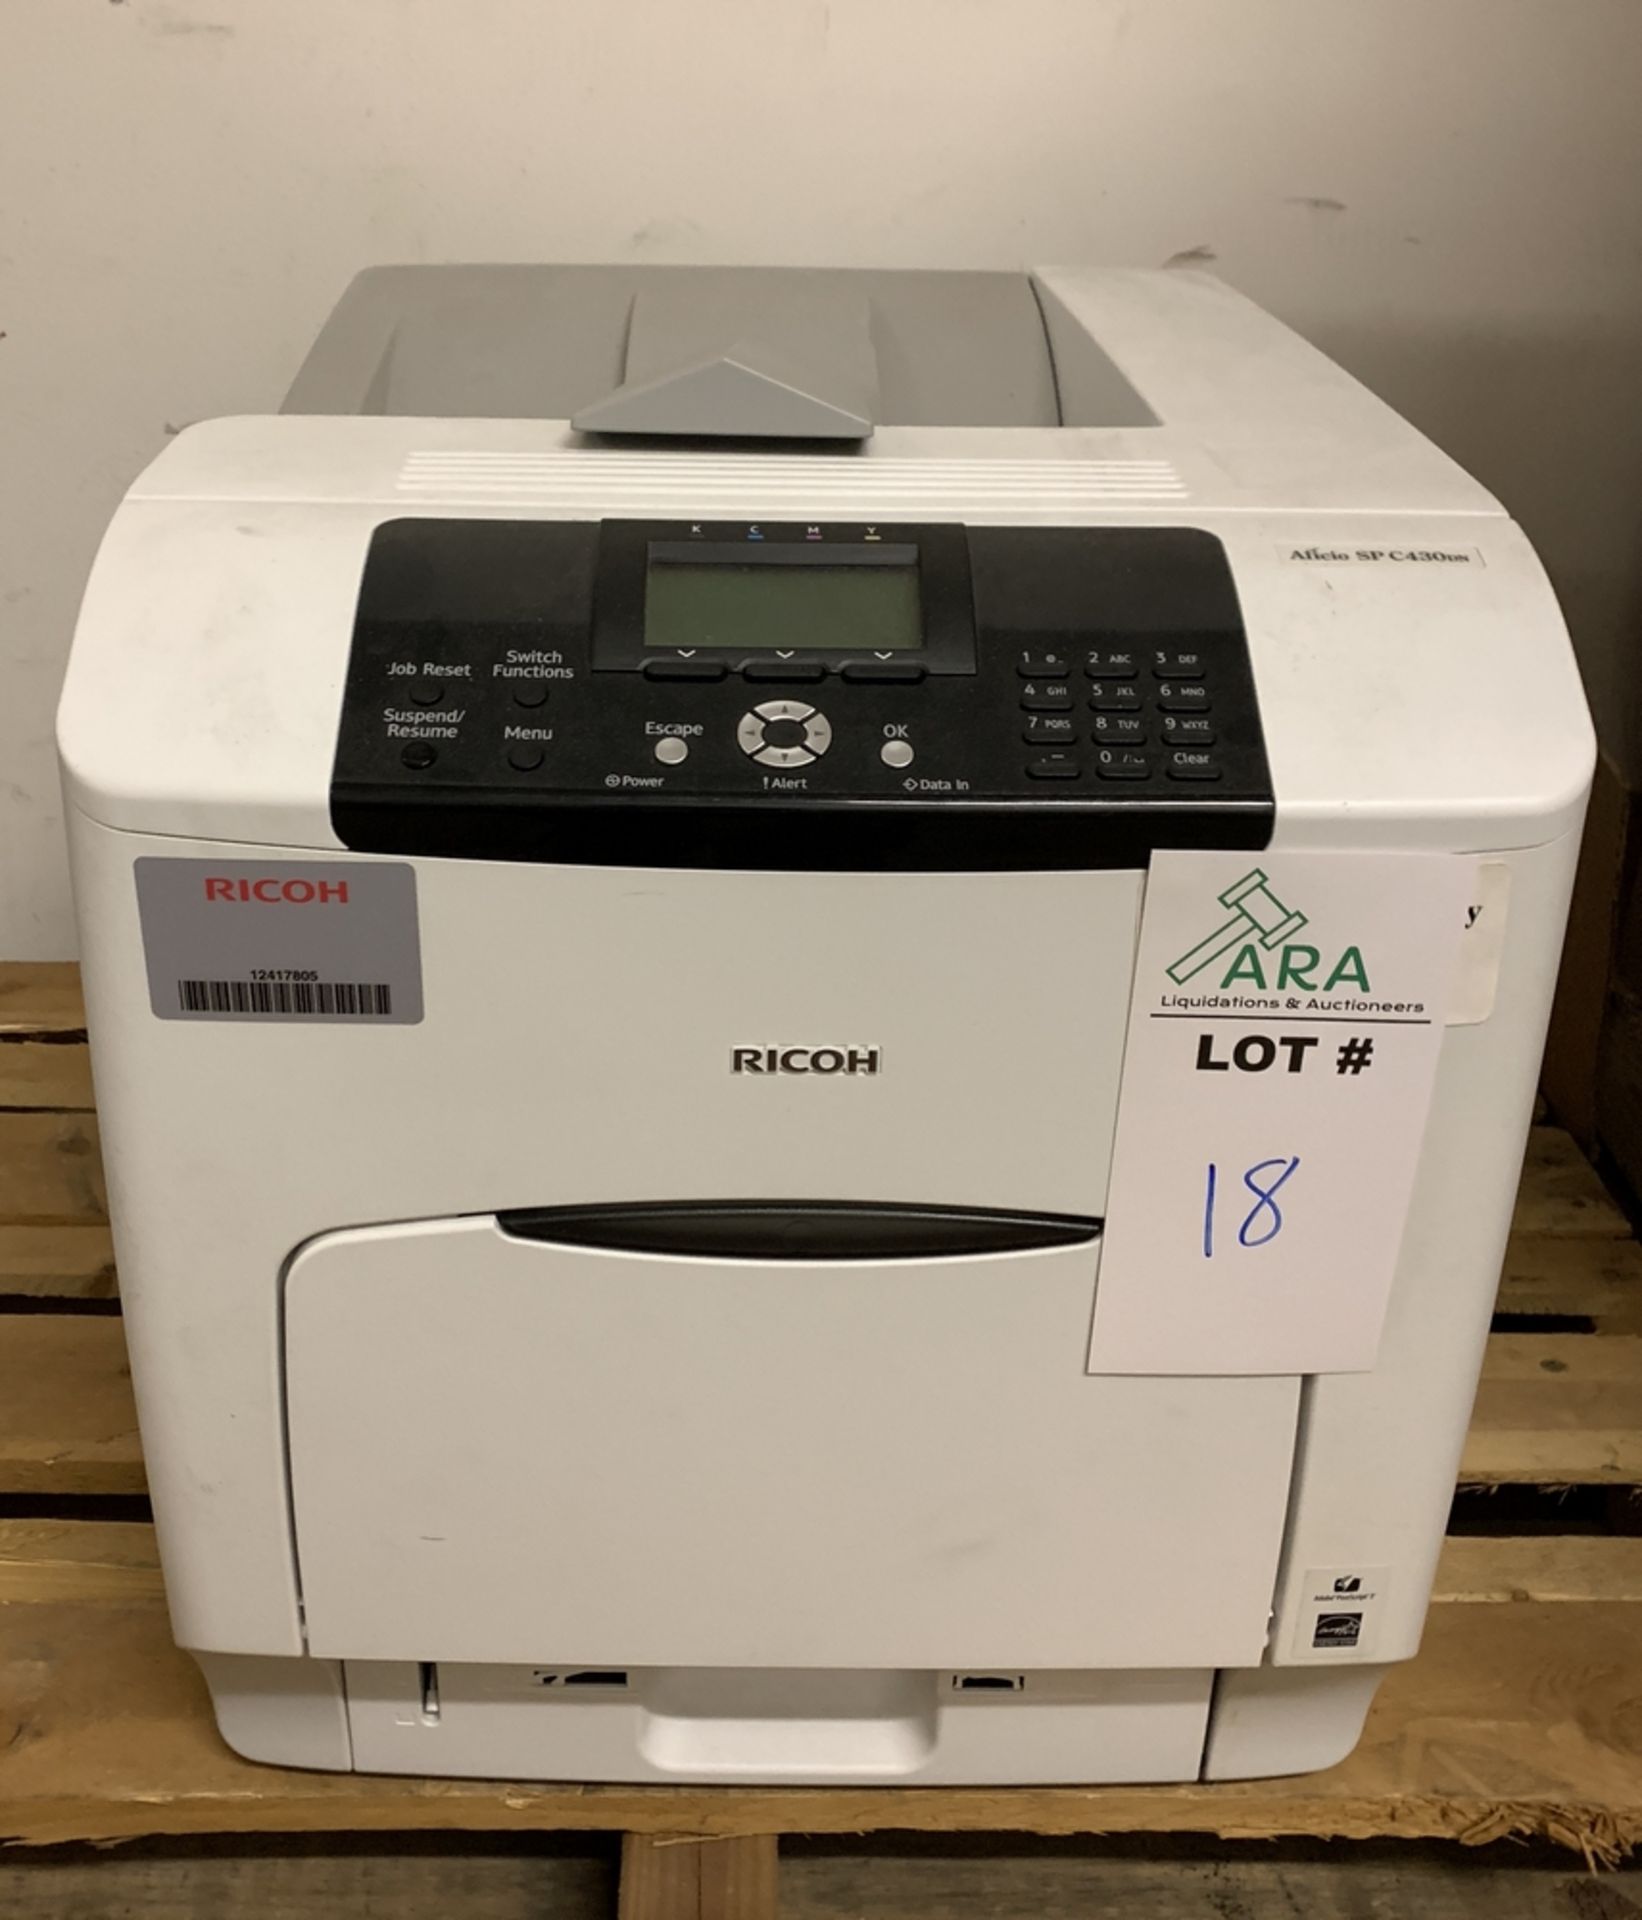 Ricoh Aficio SP C430DN All-In-One Laser Printer, EVEN USED THIS PRINTER SELLS ONLINE FOR ALMOST $600